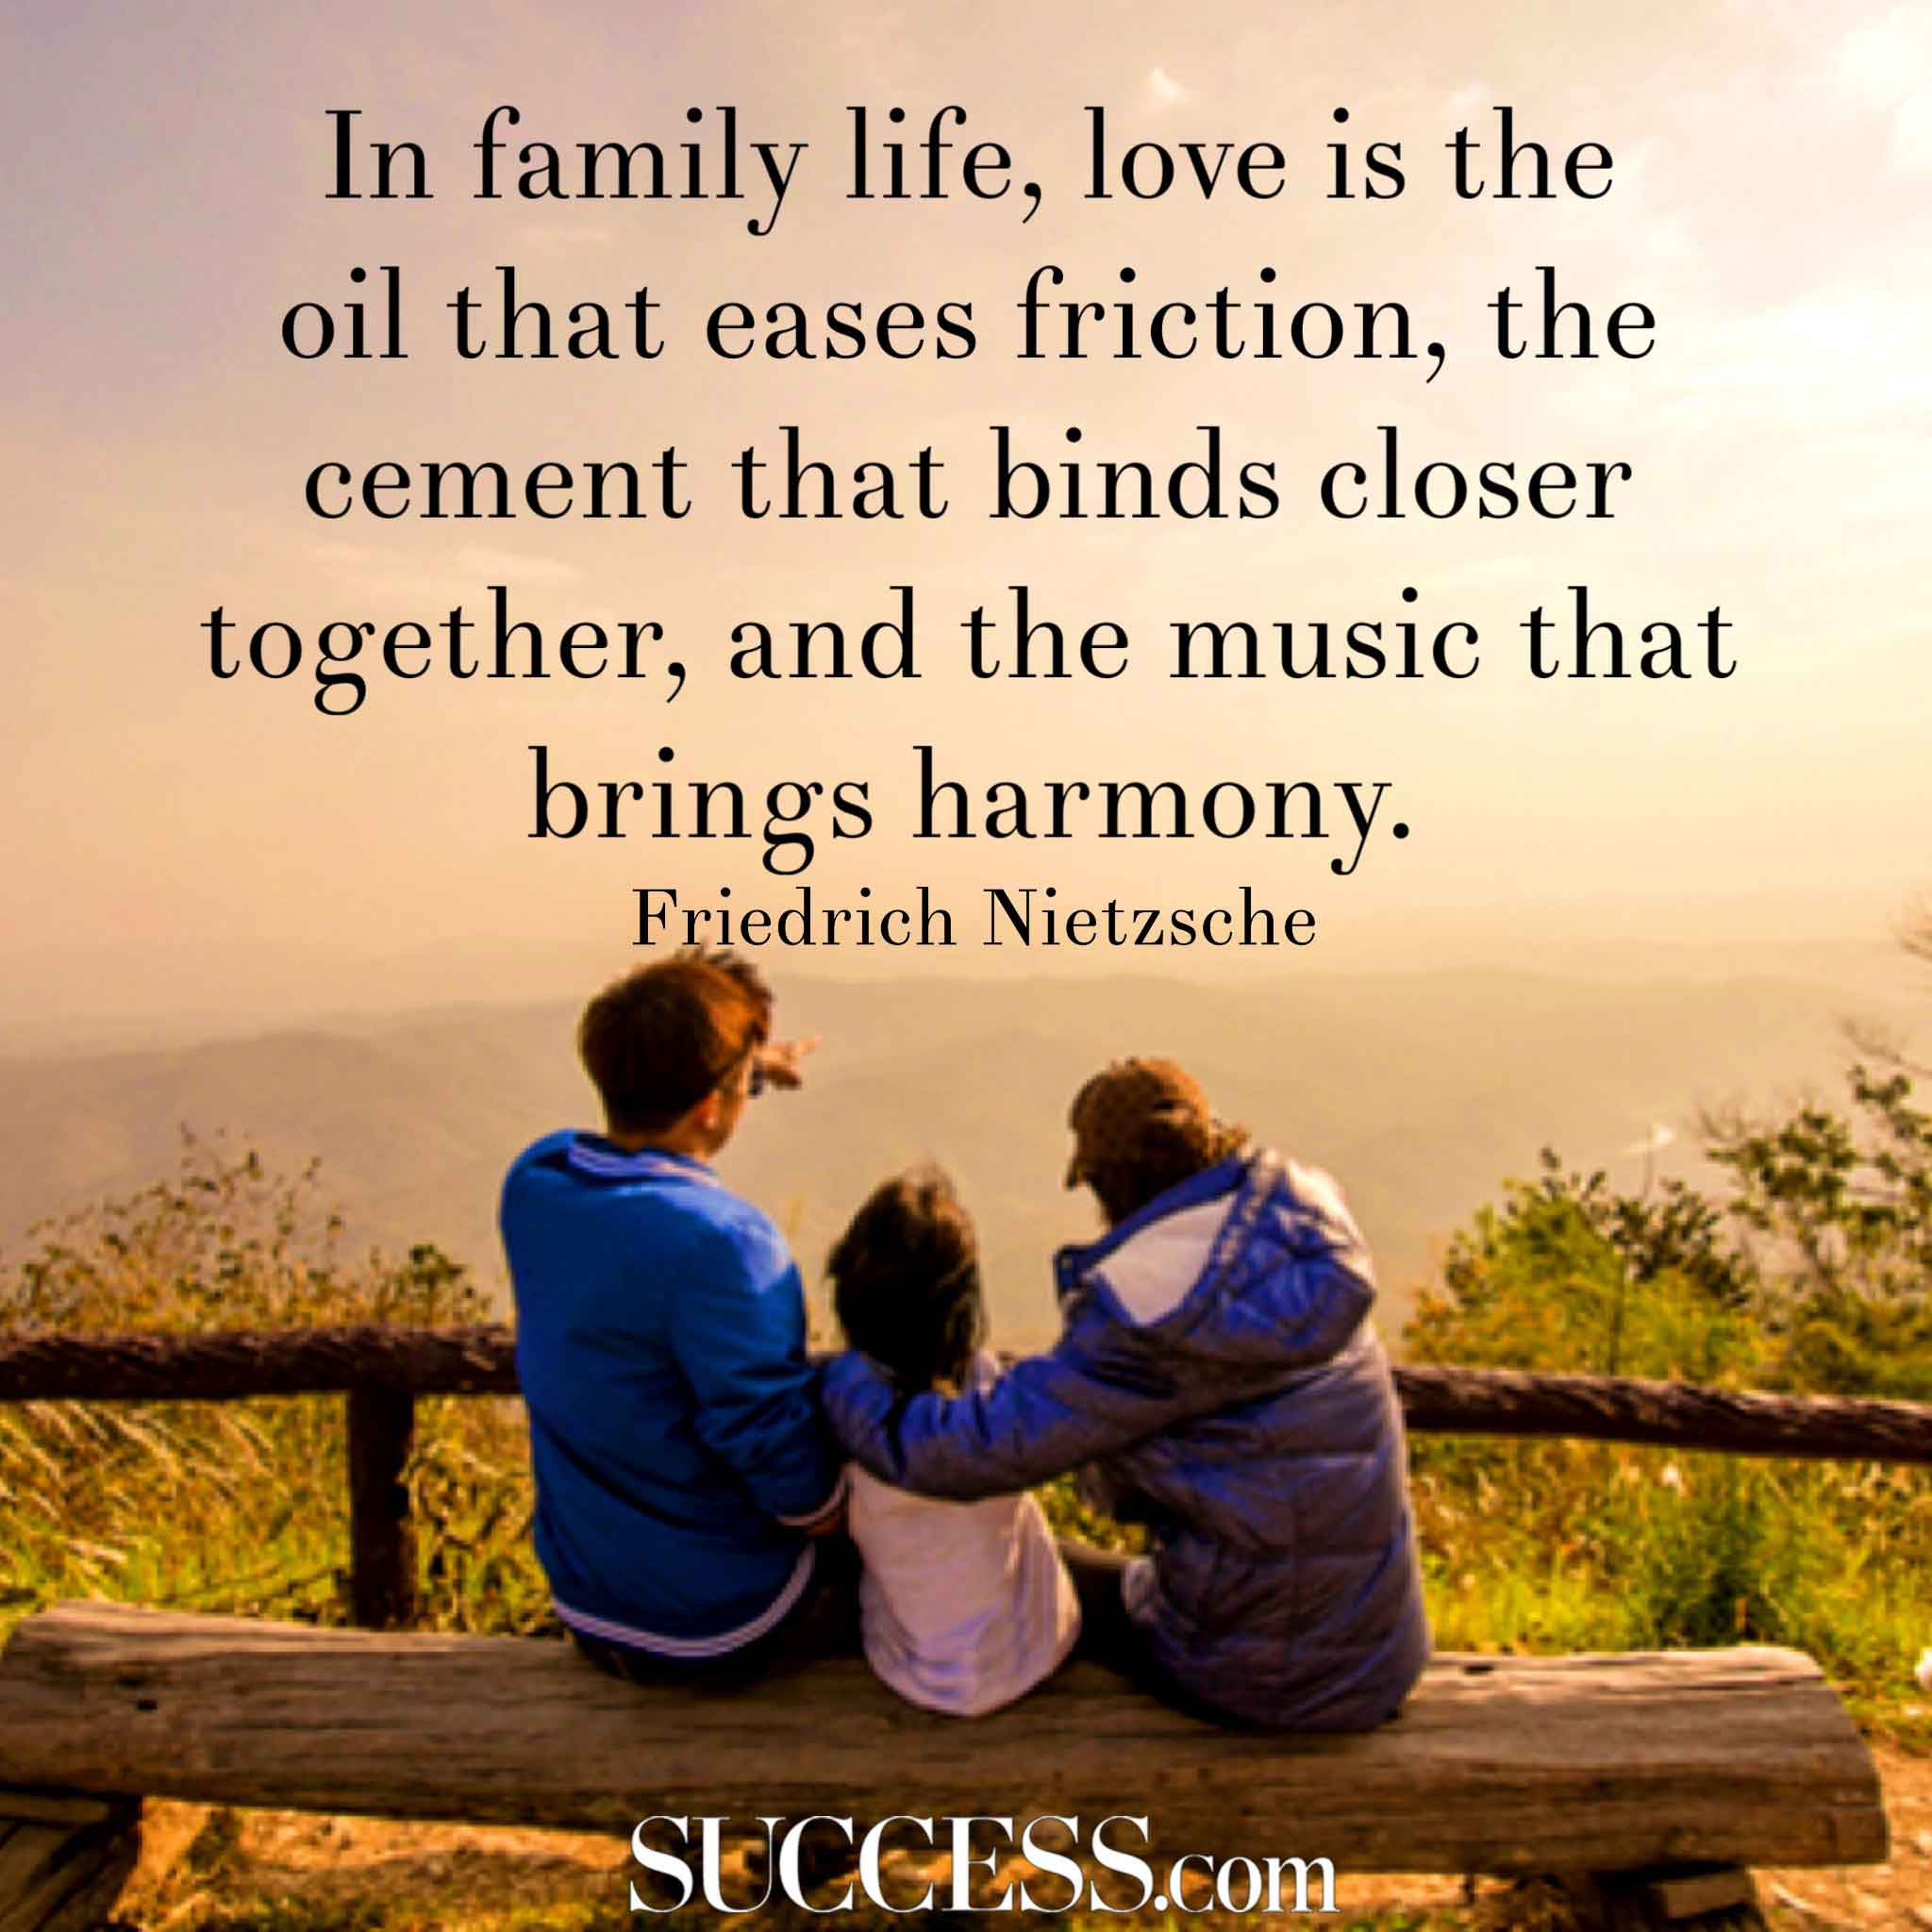 Quote About Love And Family
 14 Loving Quotes About Family